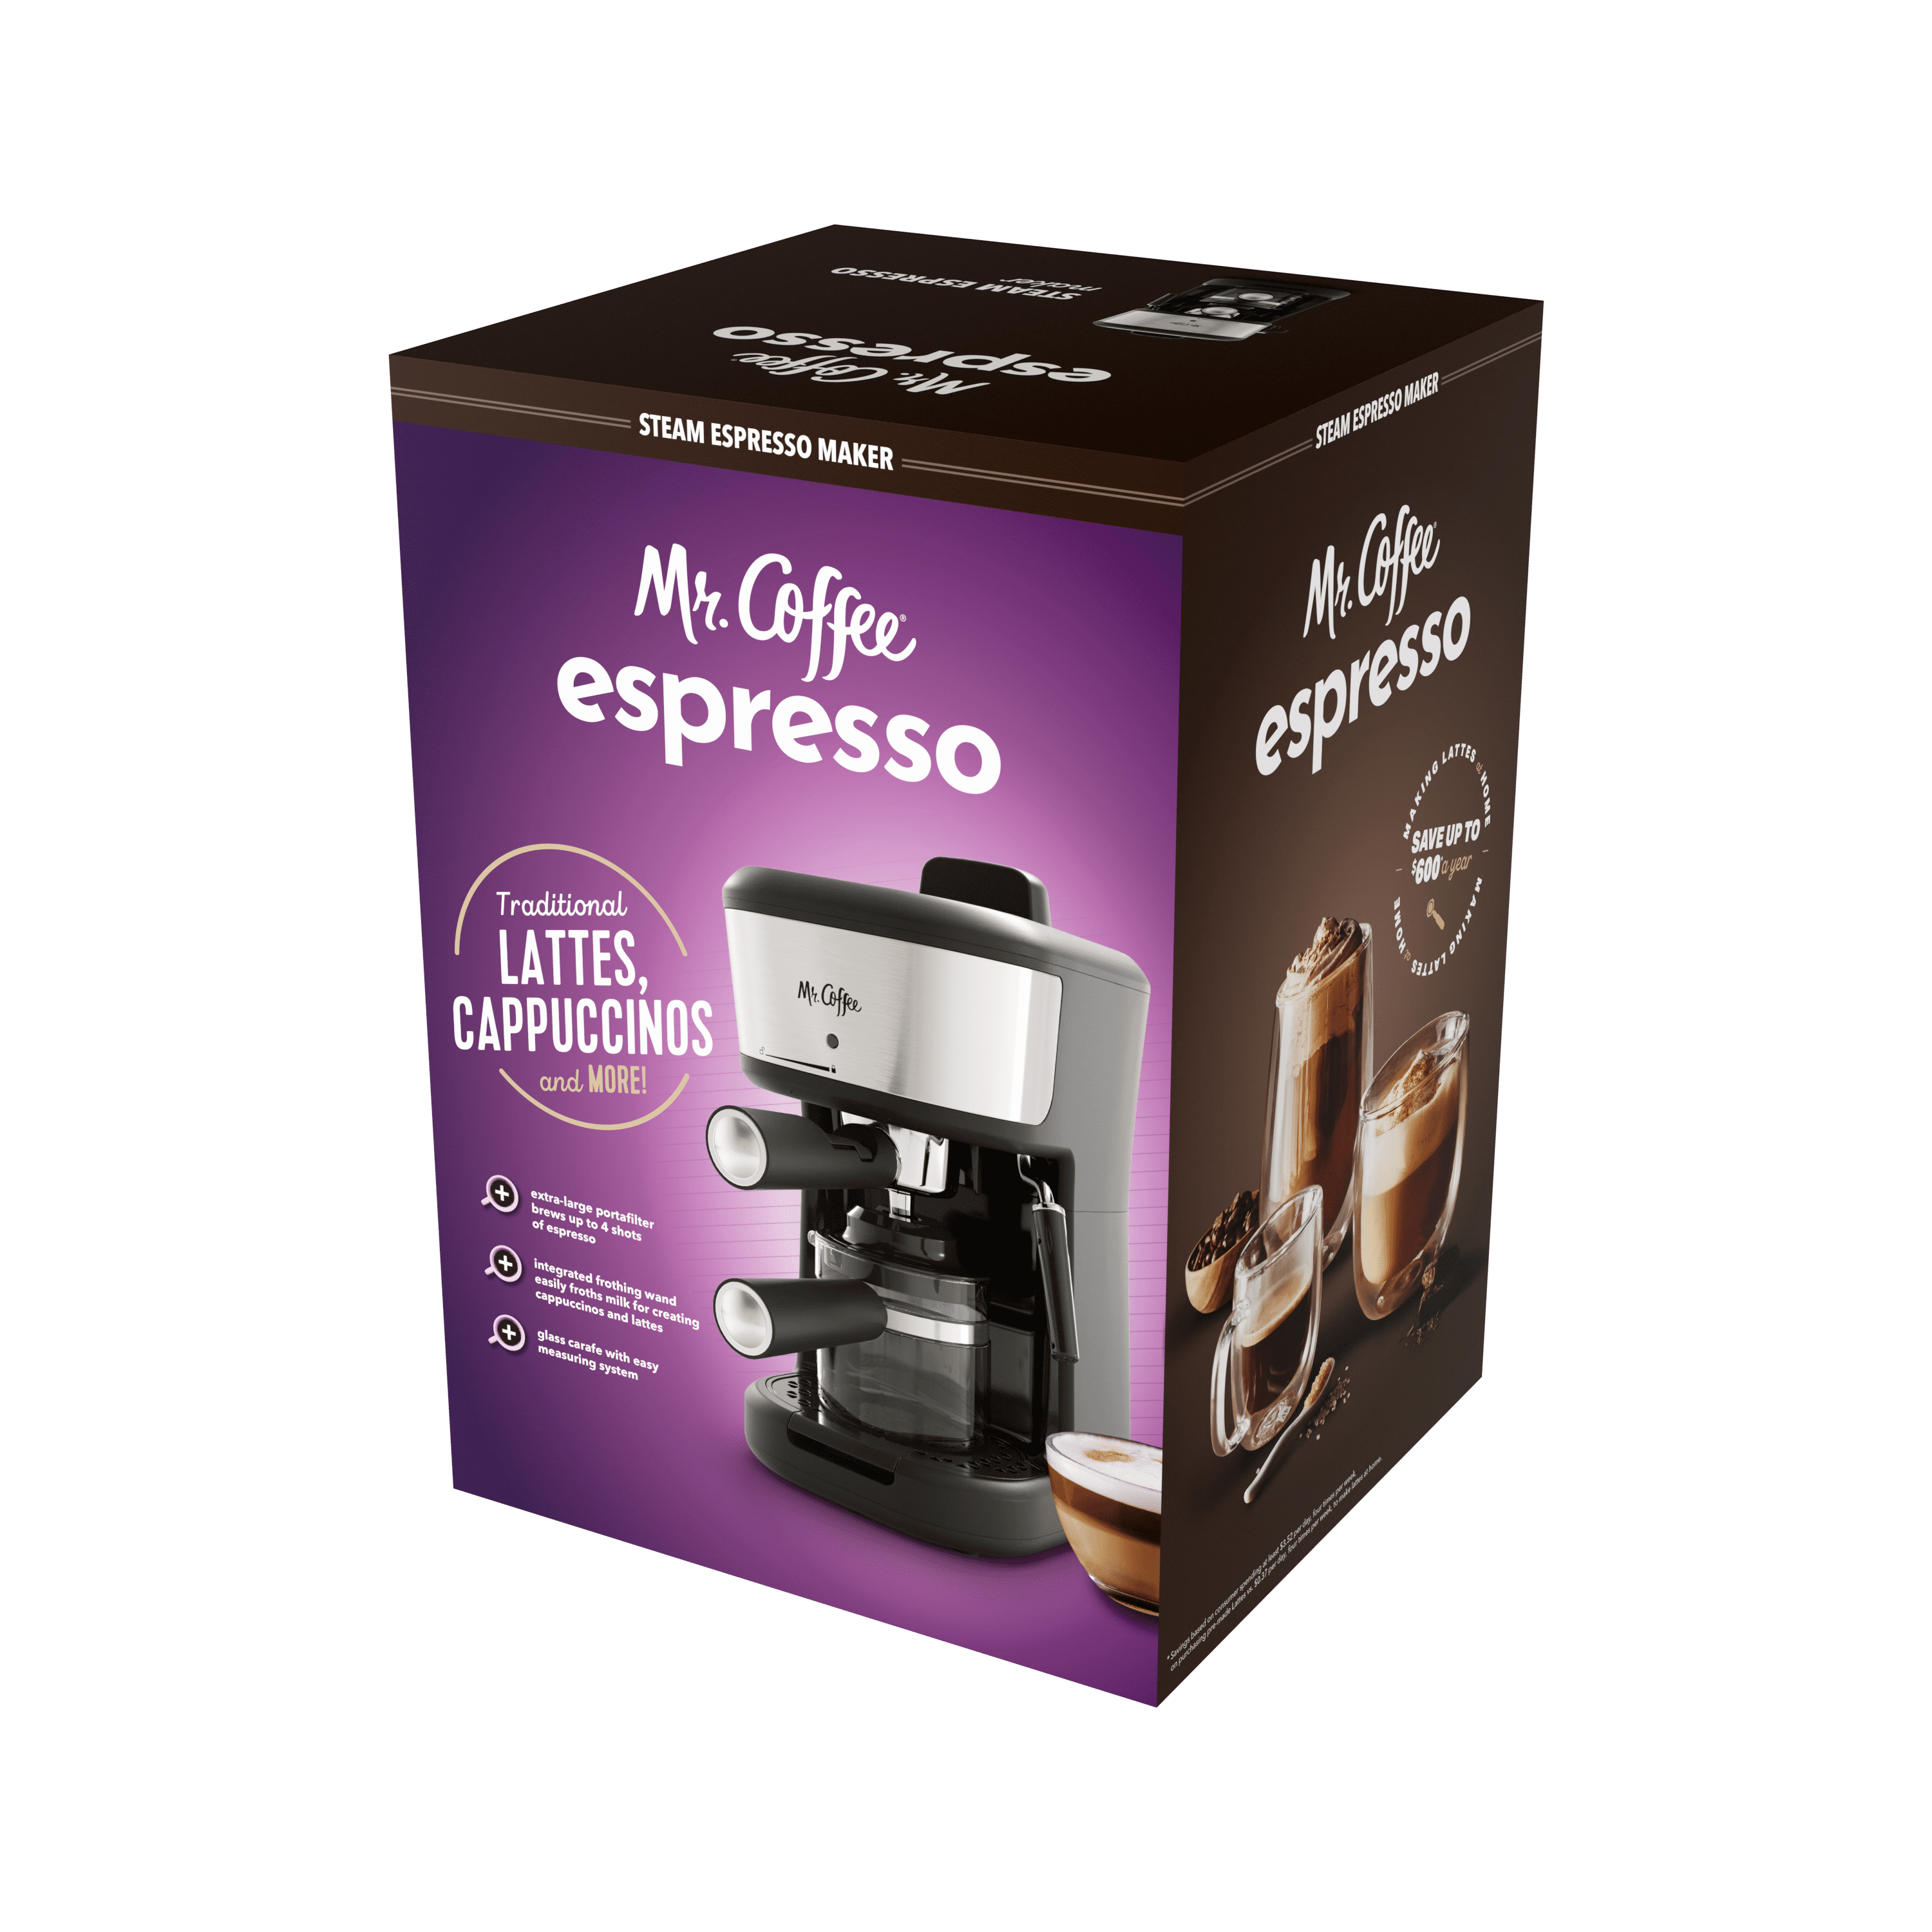 Mr. Coffee 4-Cup Steam Espresso System with Milk Frother, Size: Old Version 4-Cup size, Black